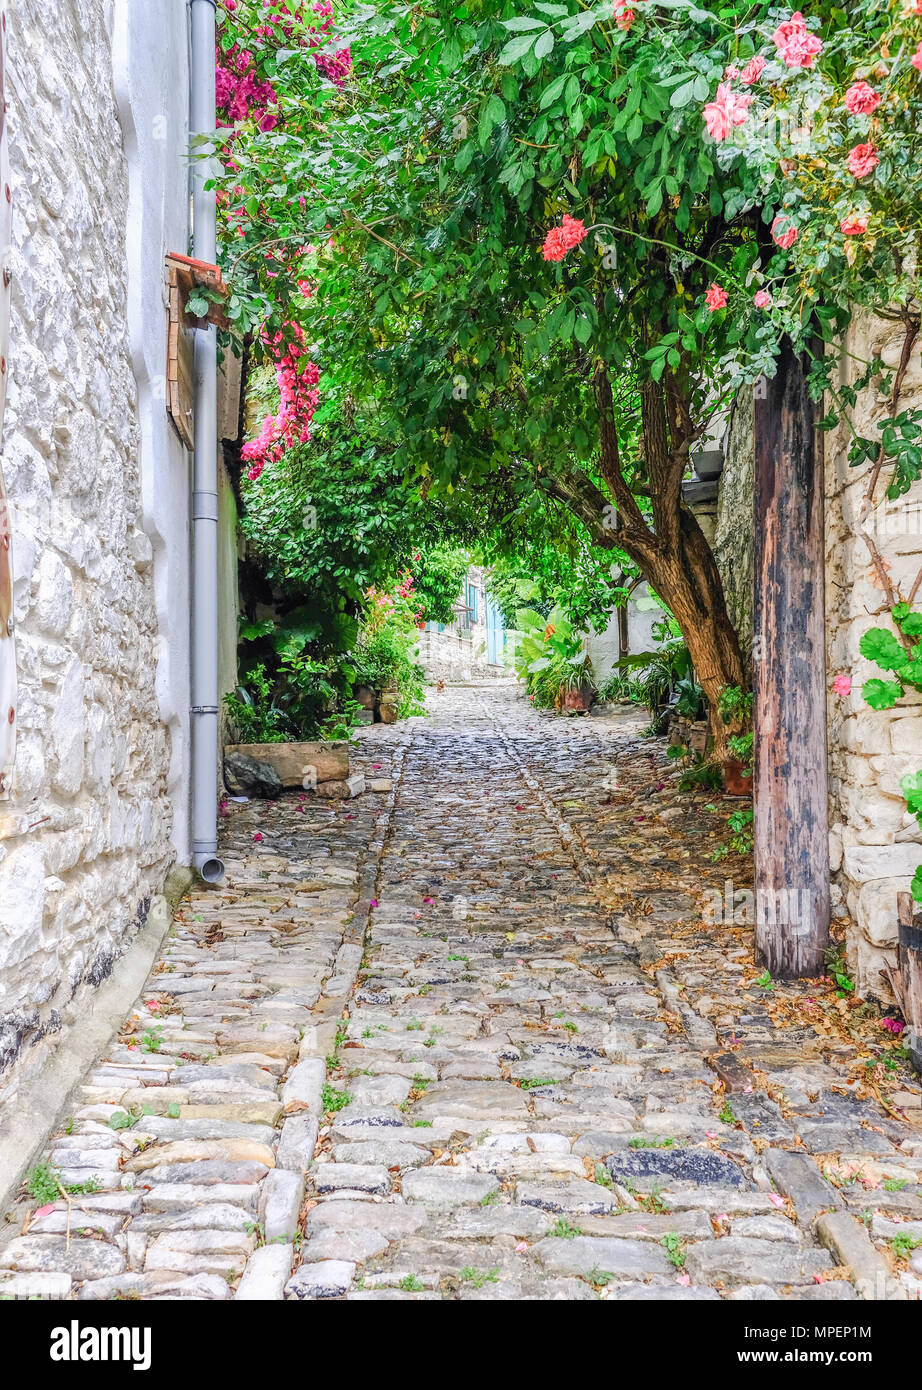 Typrical village narrow pathway leading up a cobbled walkway with overhanding green foliage of trees and plants and pink flowers. Stock Photo